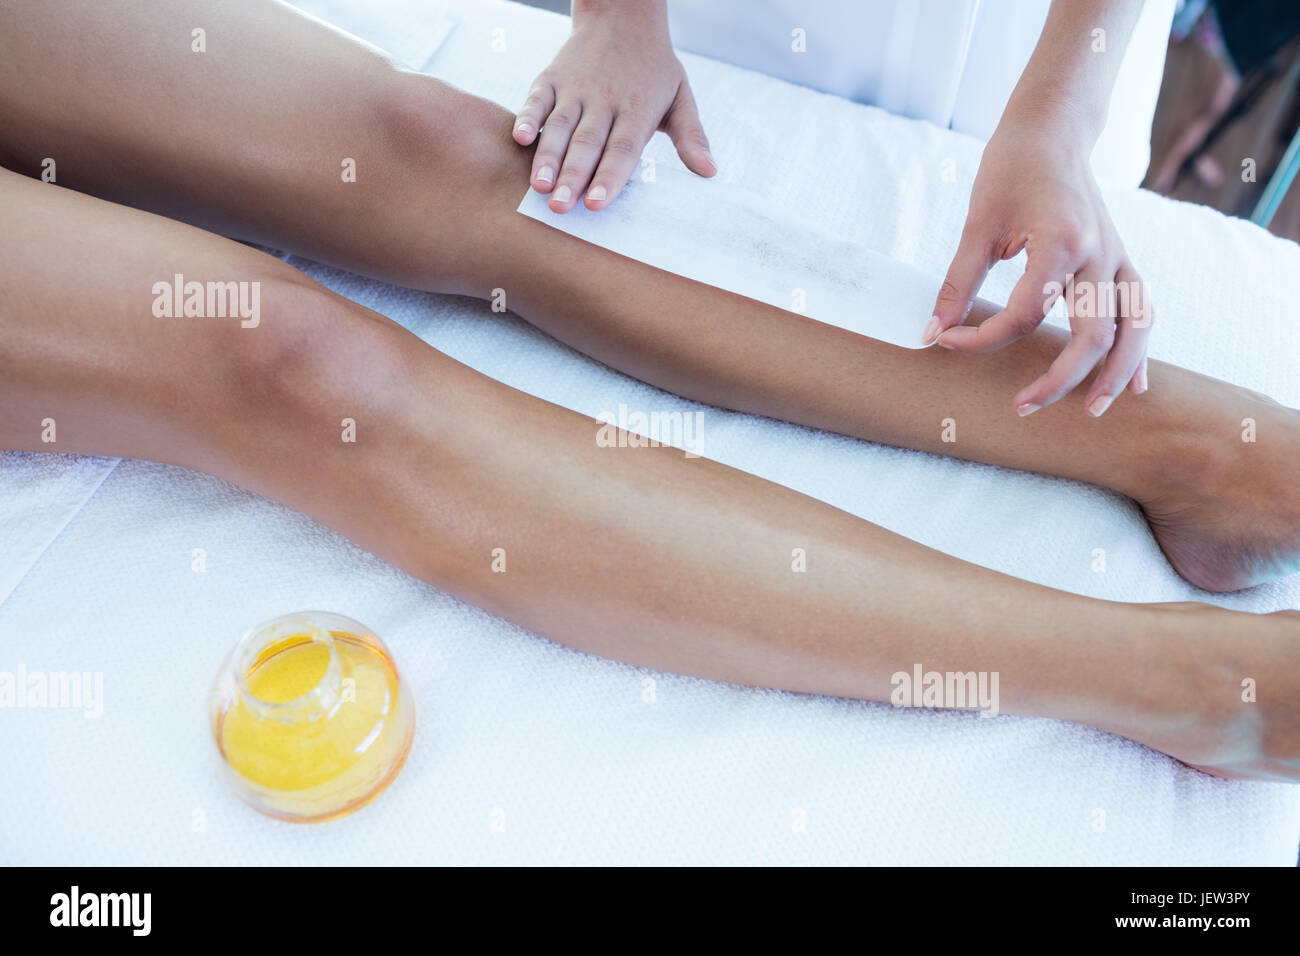 Woman getting her legs waxed Stock Photo